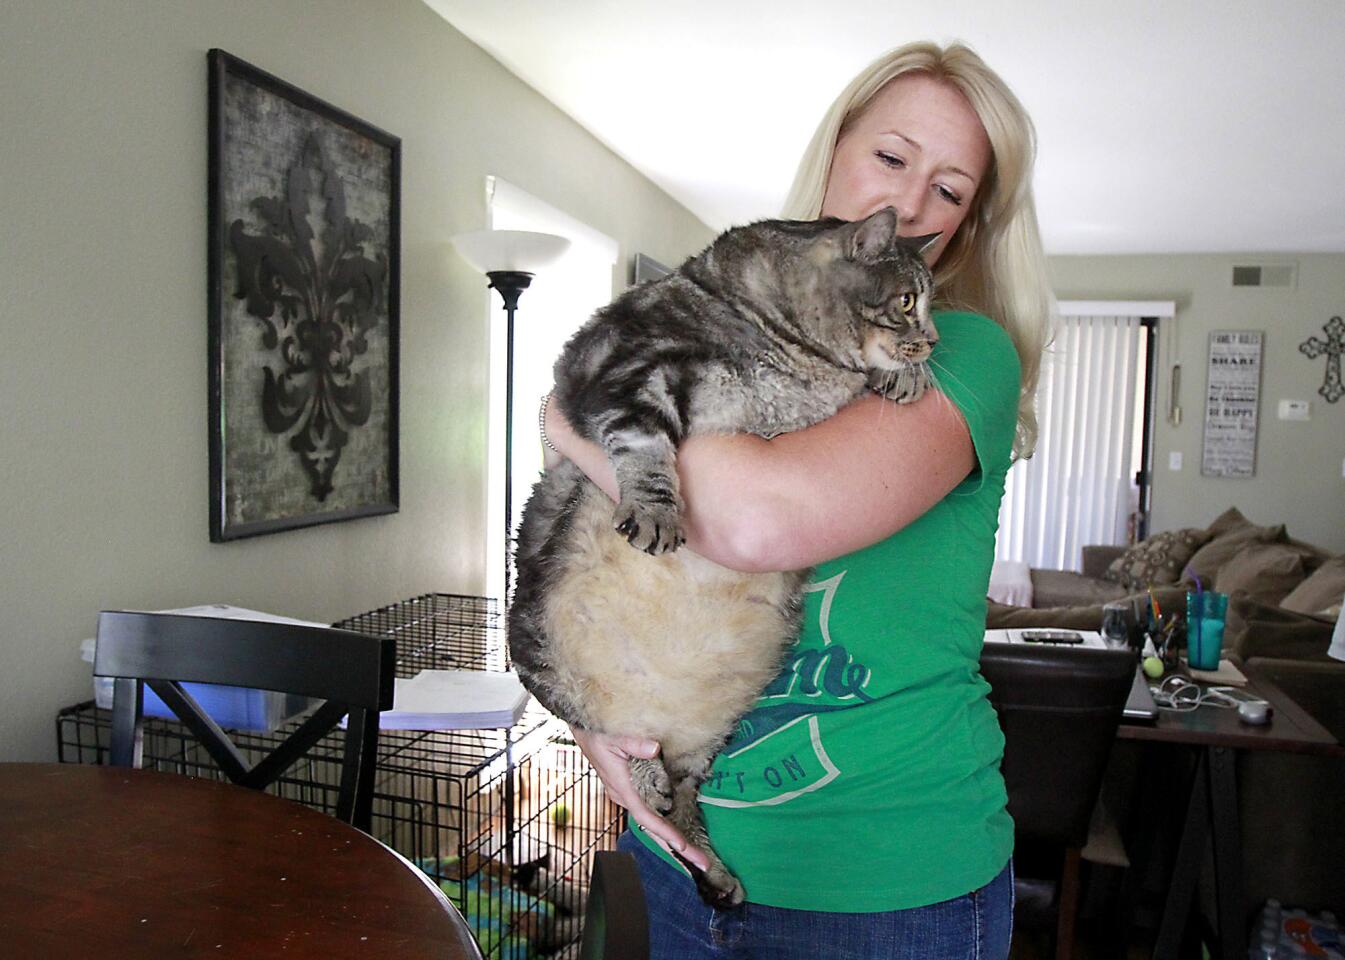 Angela Jackson Brunning picks up Little Dude, a 33-pound domestic shorthair cat that she boarded in her Costa Mesa home while he tried to lose weight. He would later die after struggles with his health.